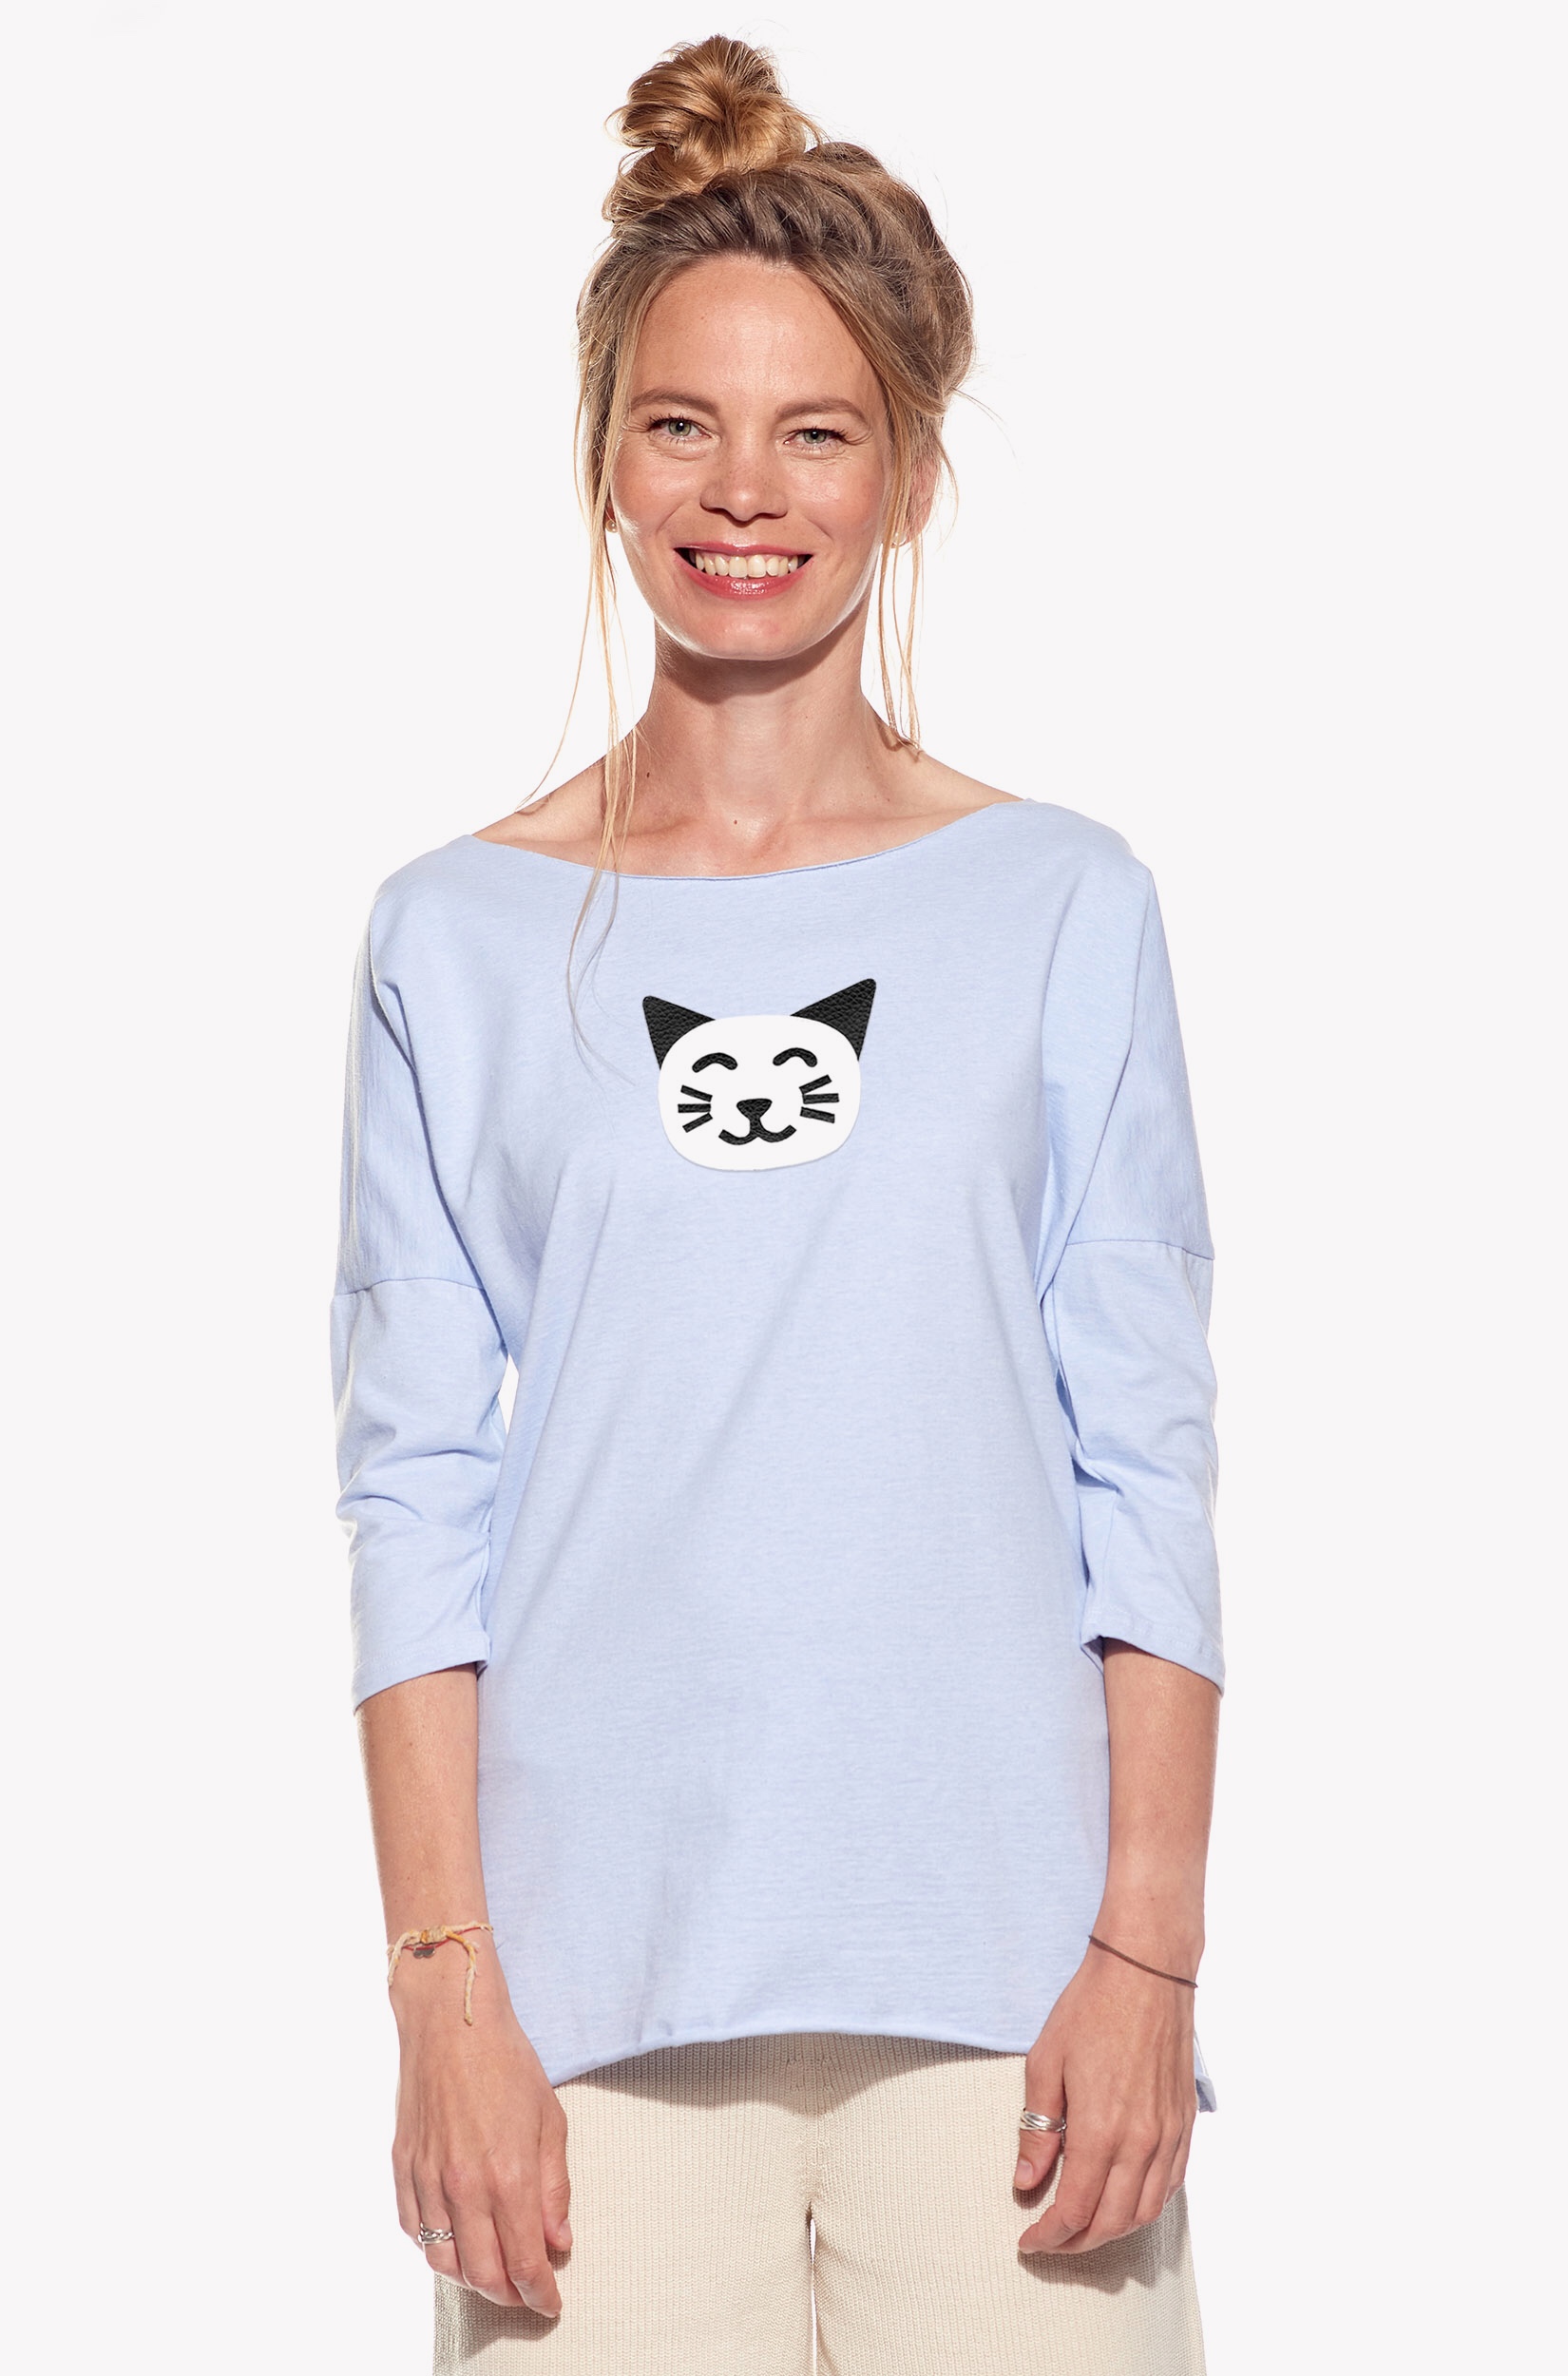 Shirt with cat